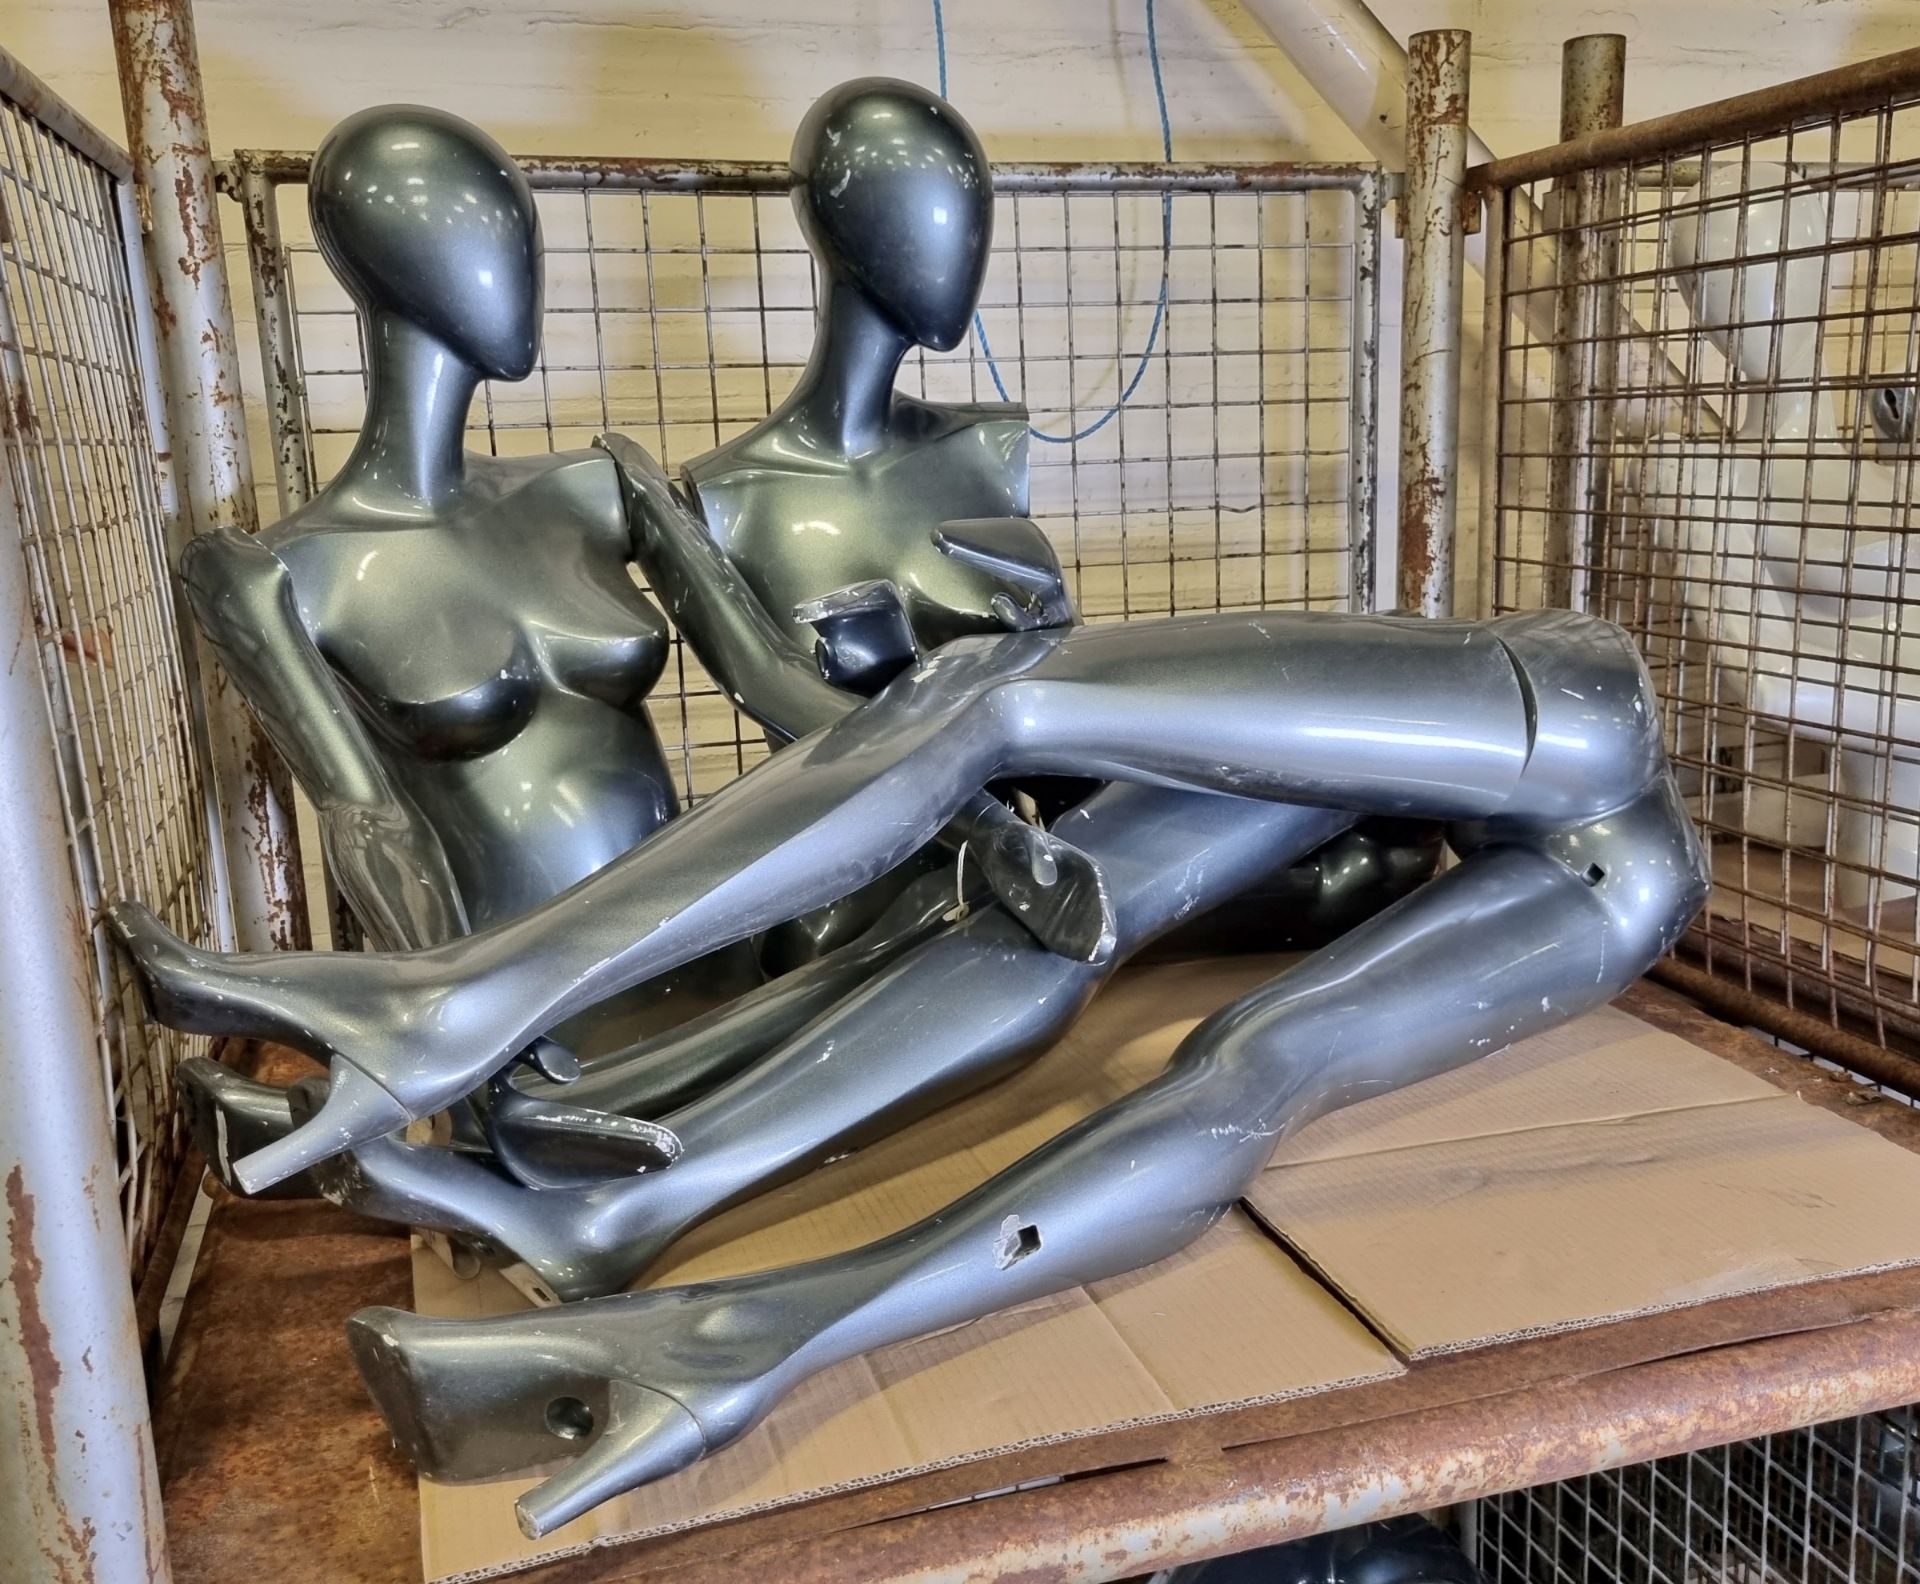 2x metallic grey plastic female mannequins with detachable limbs - Image 3 of 3